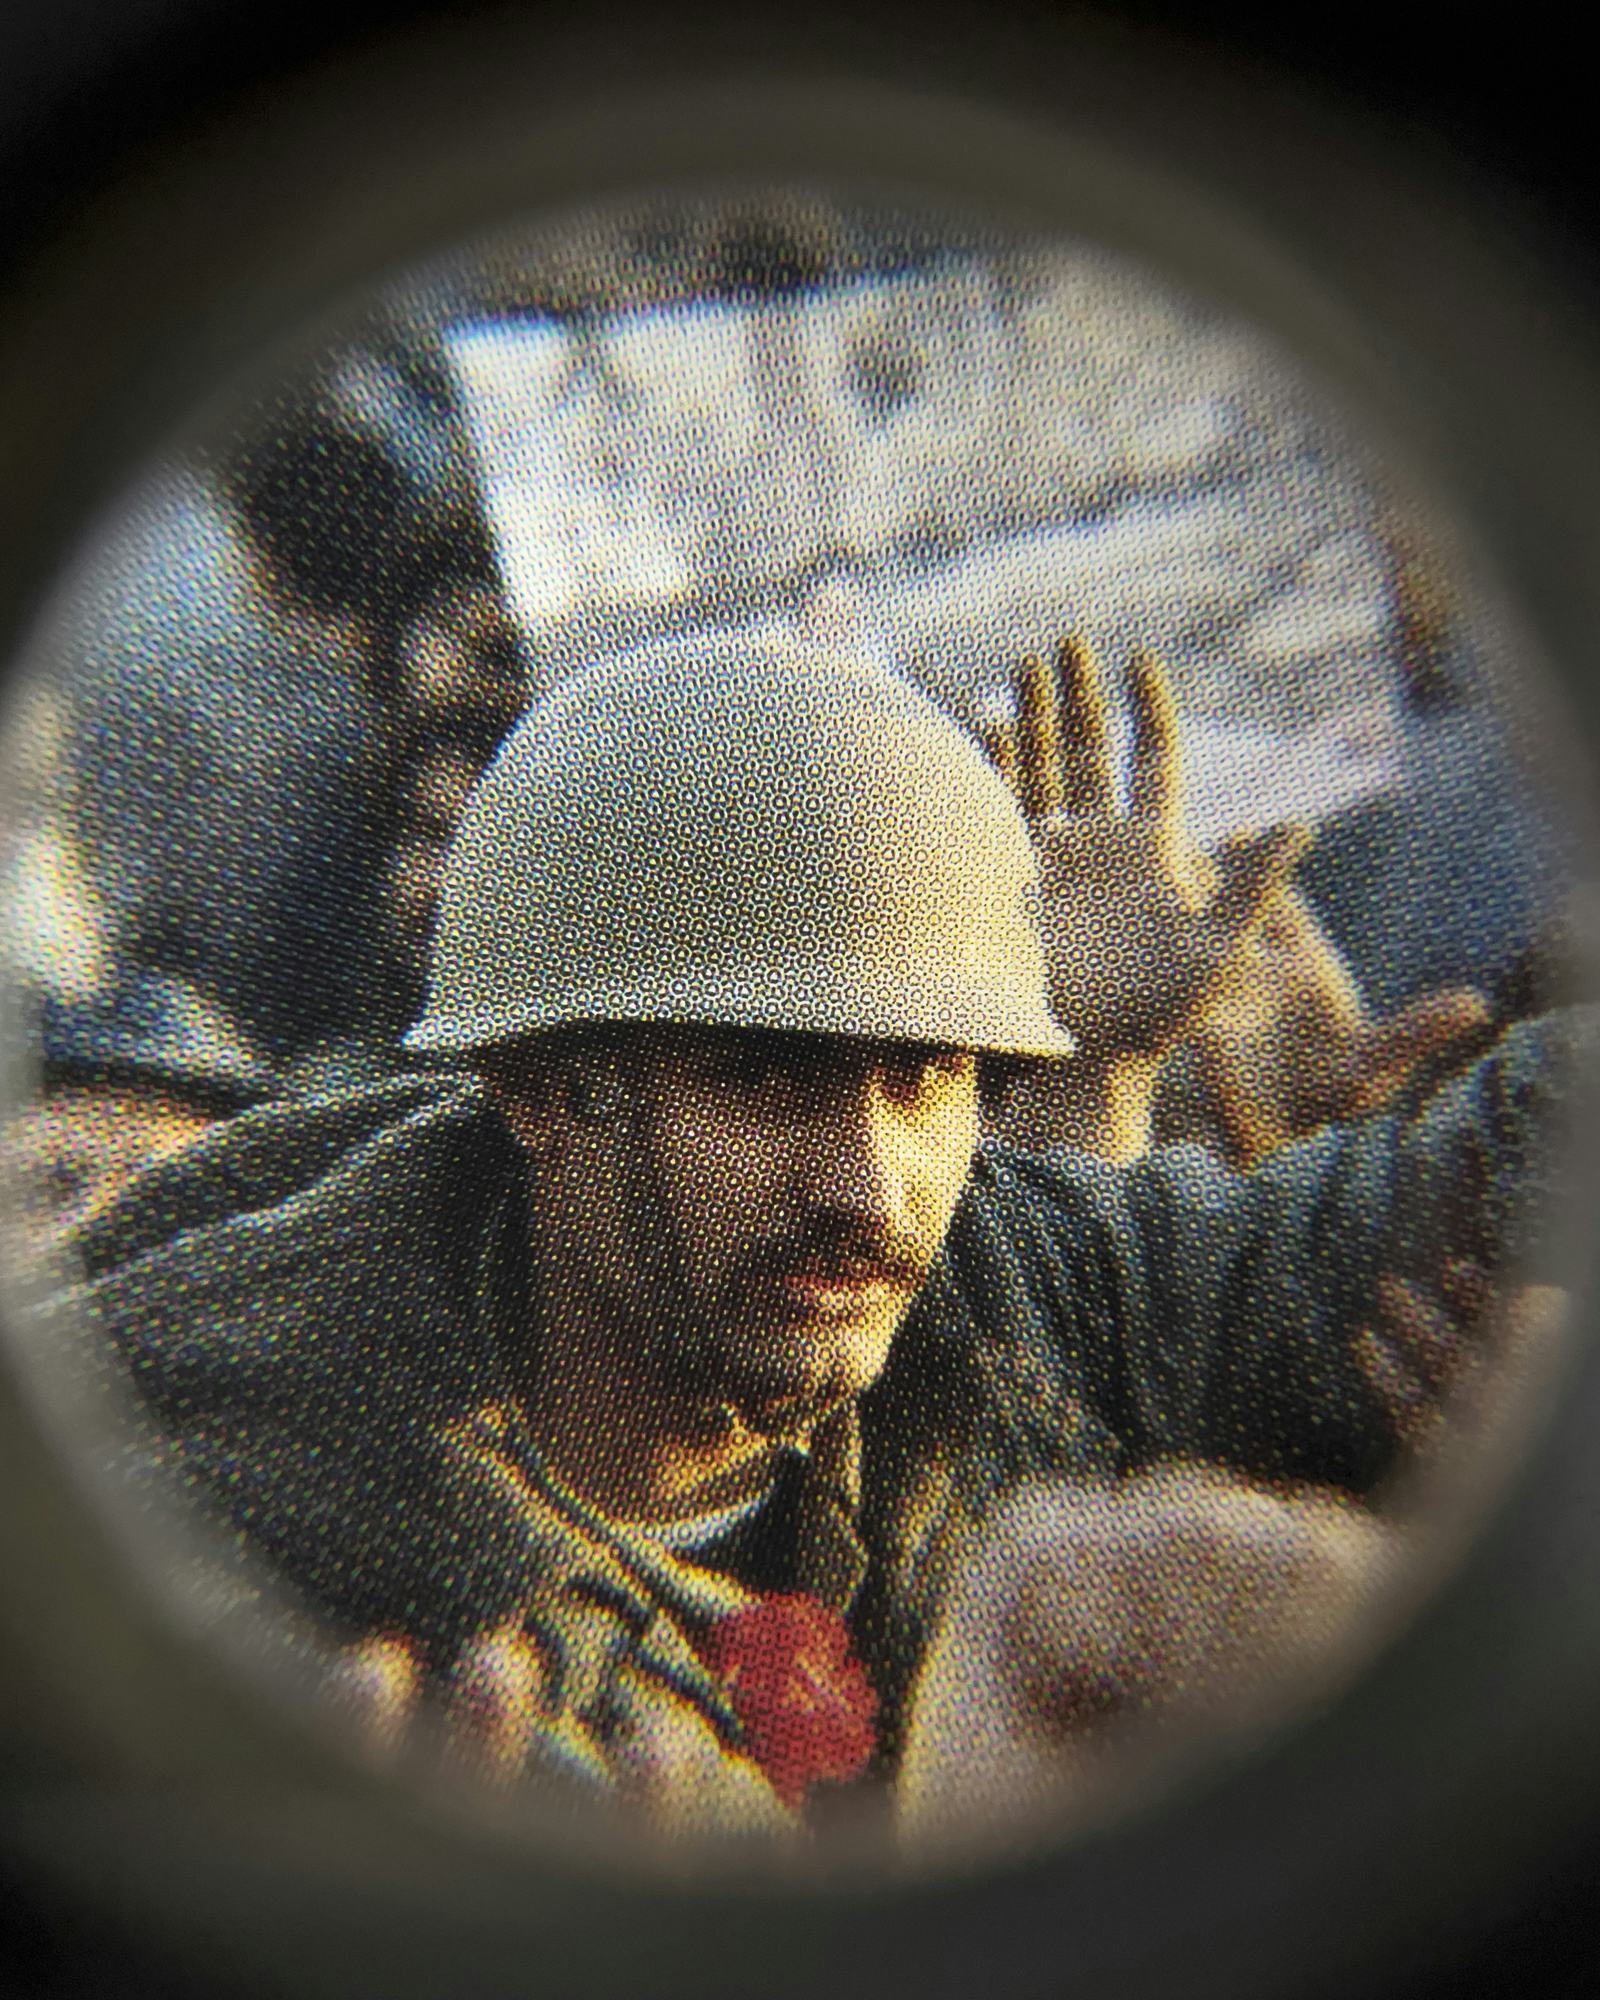 Coloured close-up image of an existing photograph, showing a man wearing a helmet staring into the camera, in the middle of a protest. Shot through a magnifying lens © Amin Yousefi